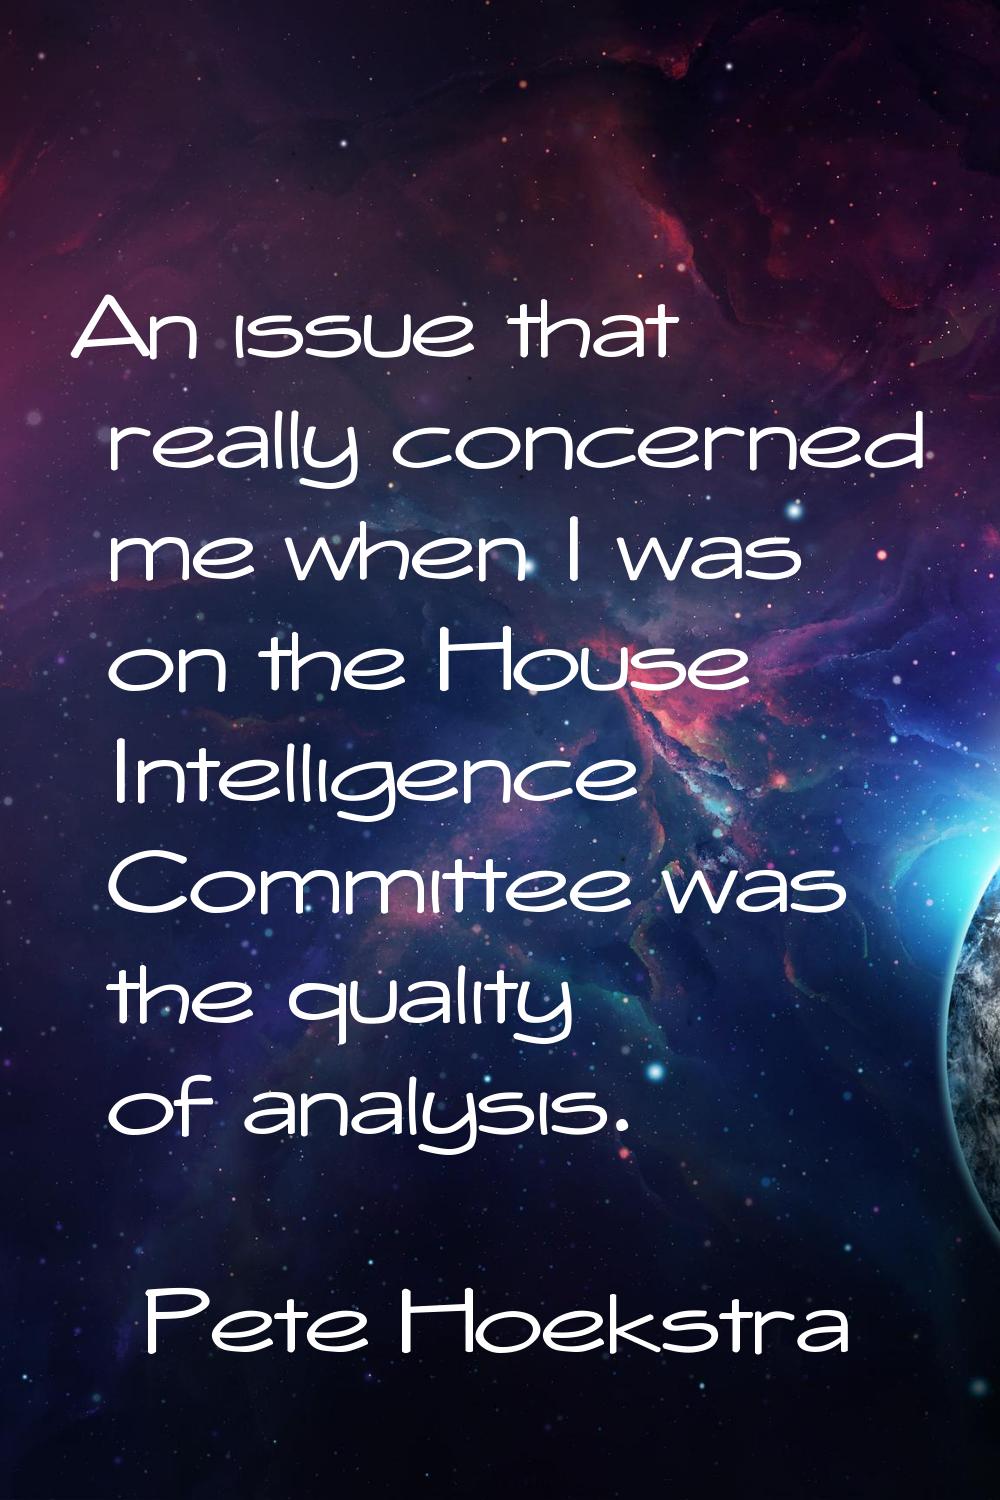 An issue that really concerned me when I was on the House Intelligence Committee was the quality of